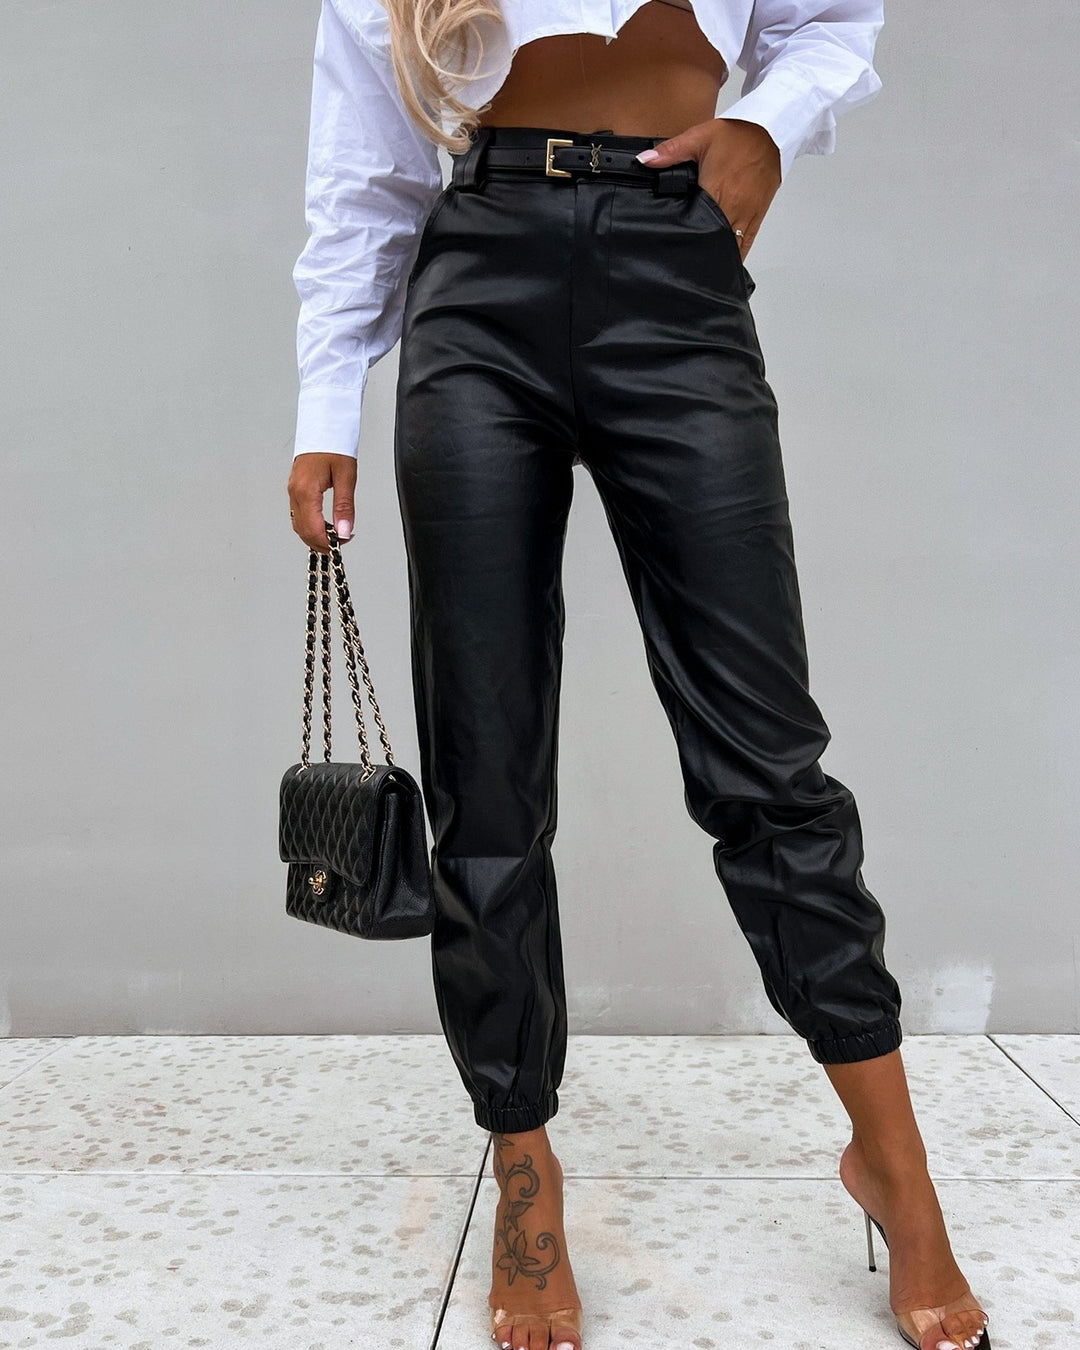 Women's PU Leather Casual Pants